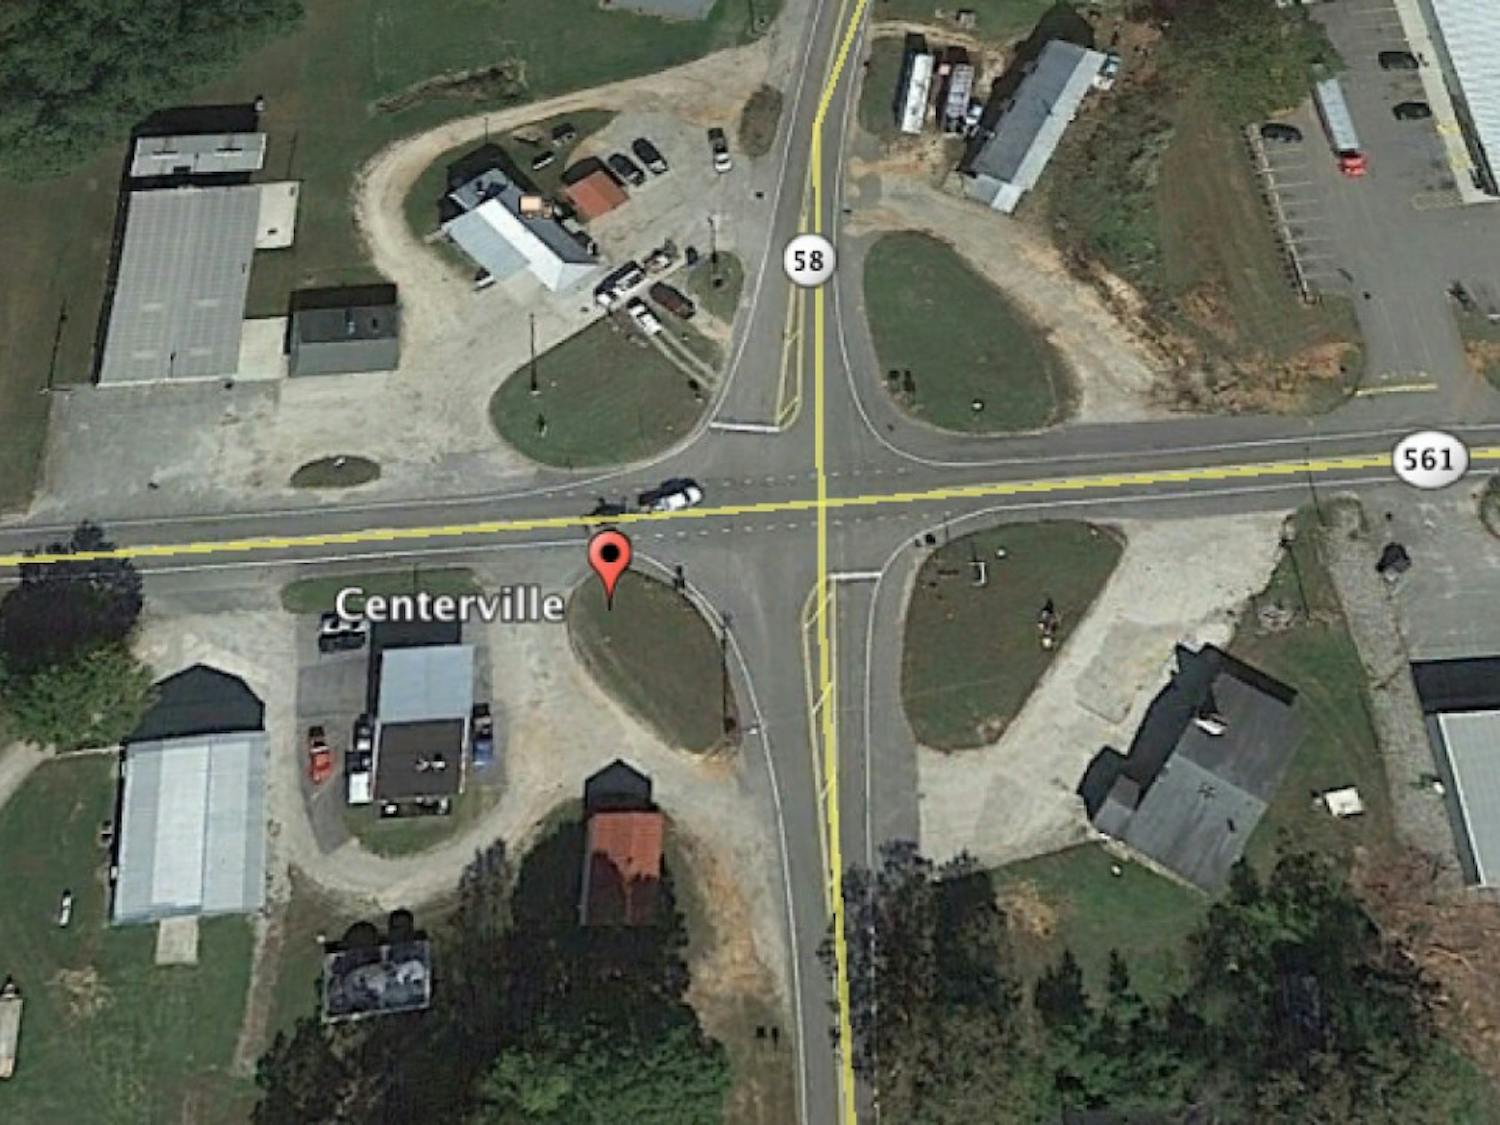 The town of Centerville is located about 70 miles from Chapel Hill. Google Earth screenshot by The Daily Tar Heel.